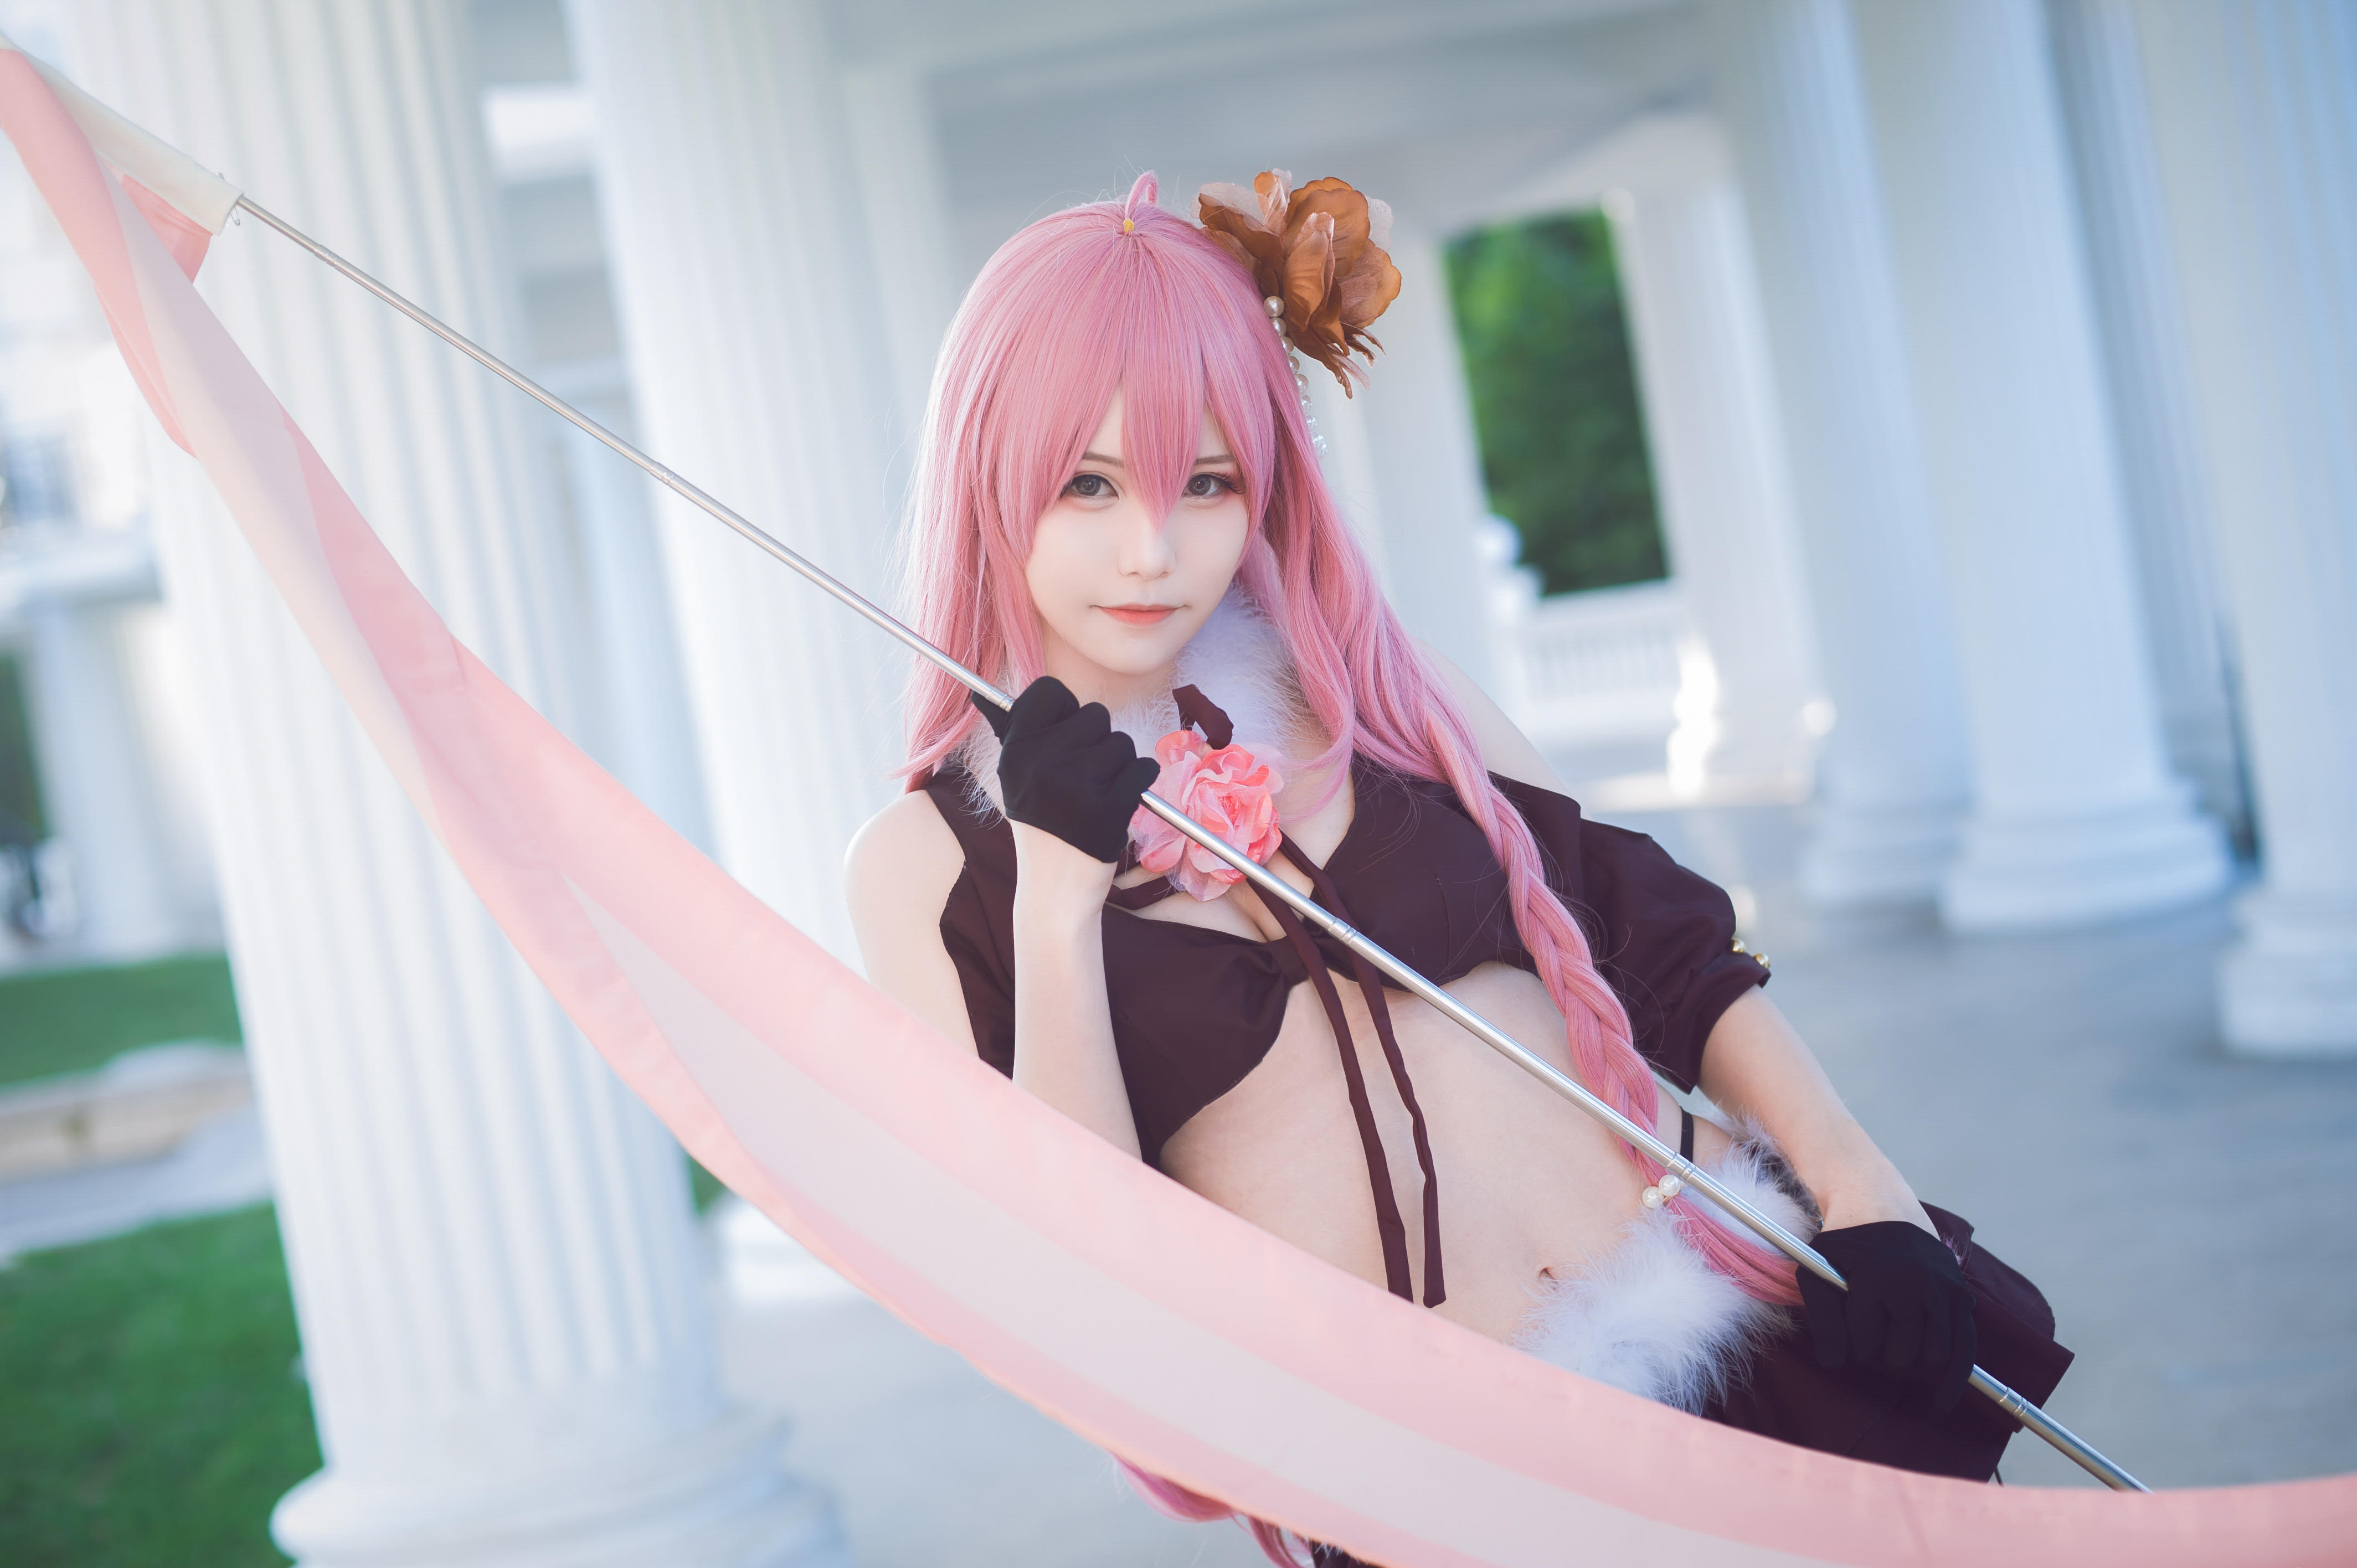 【Cosplay】VOCALOID 御姐